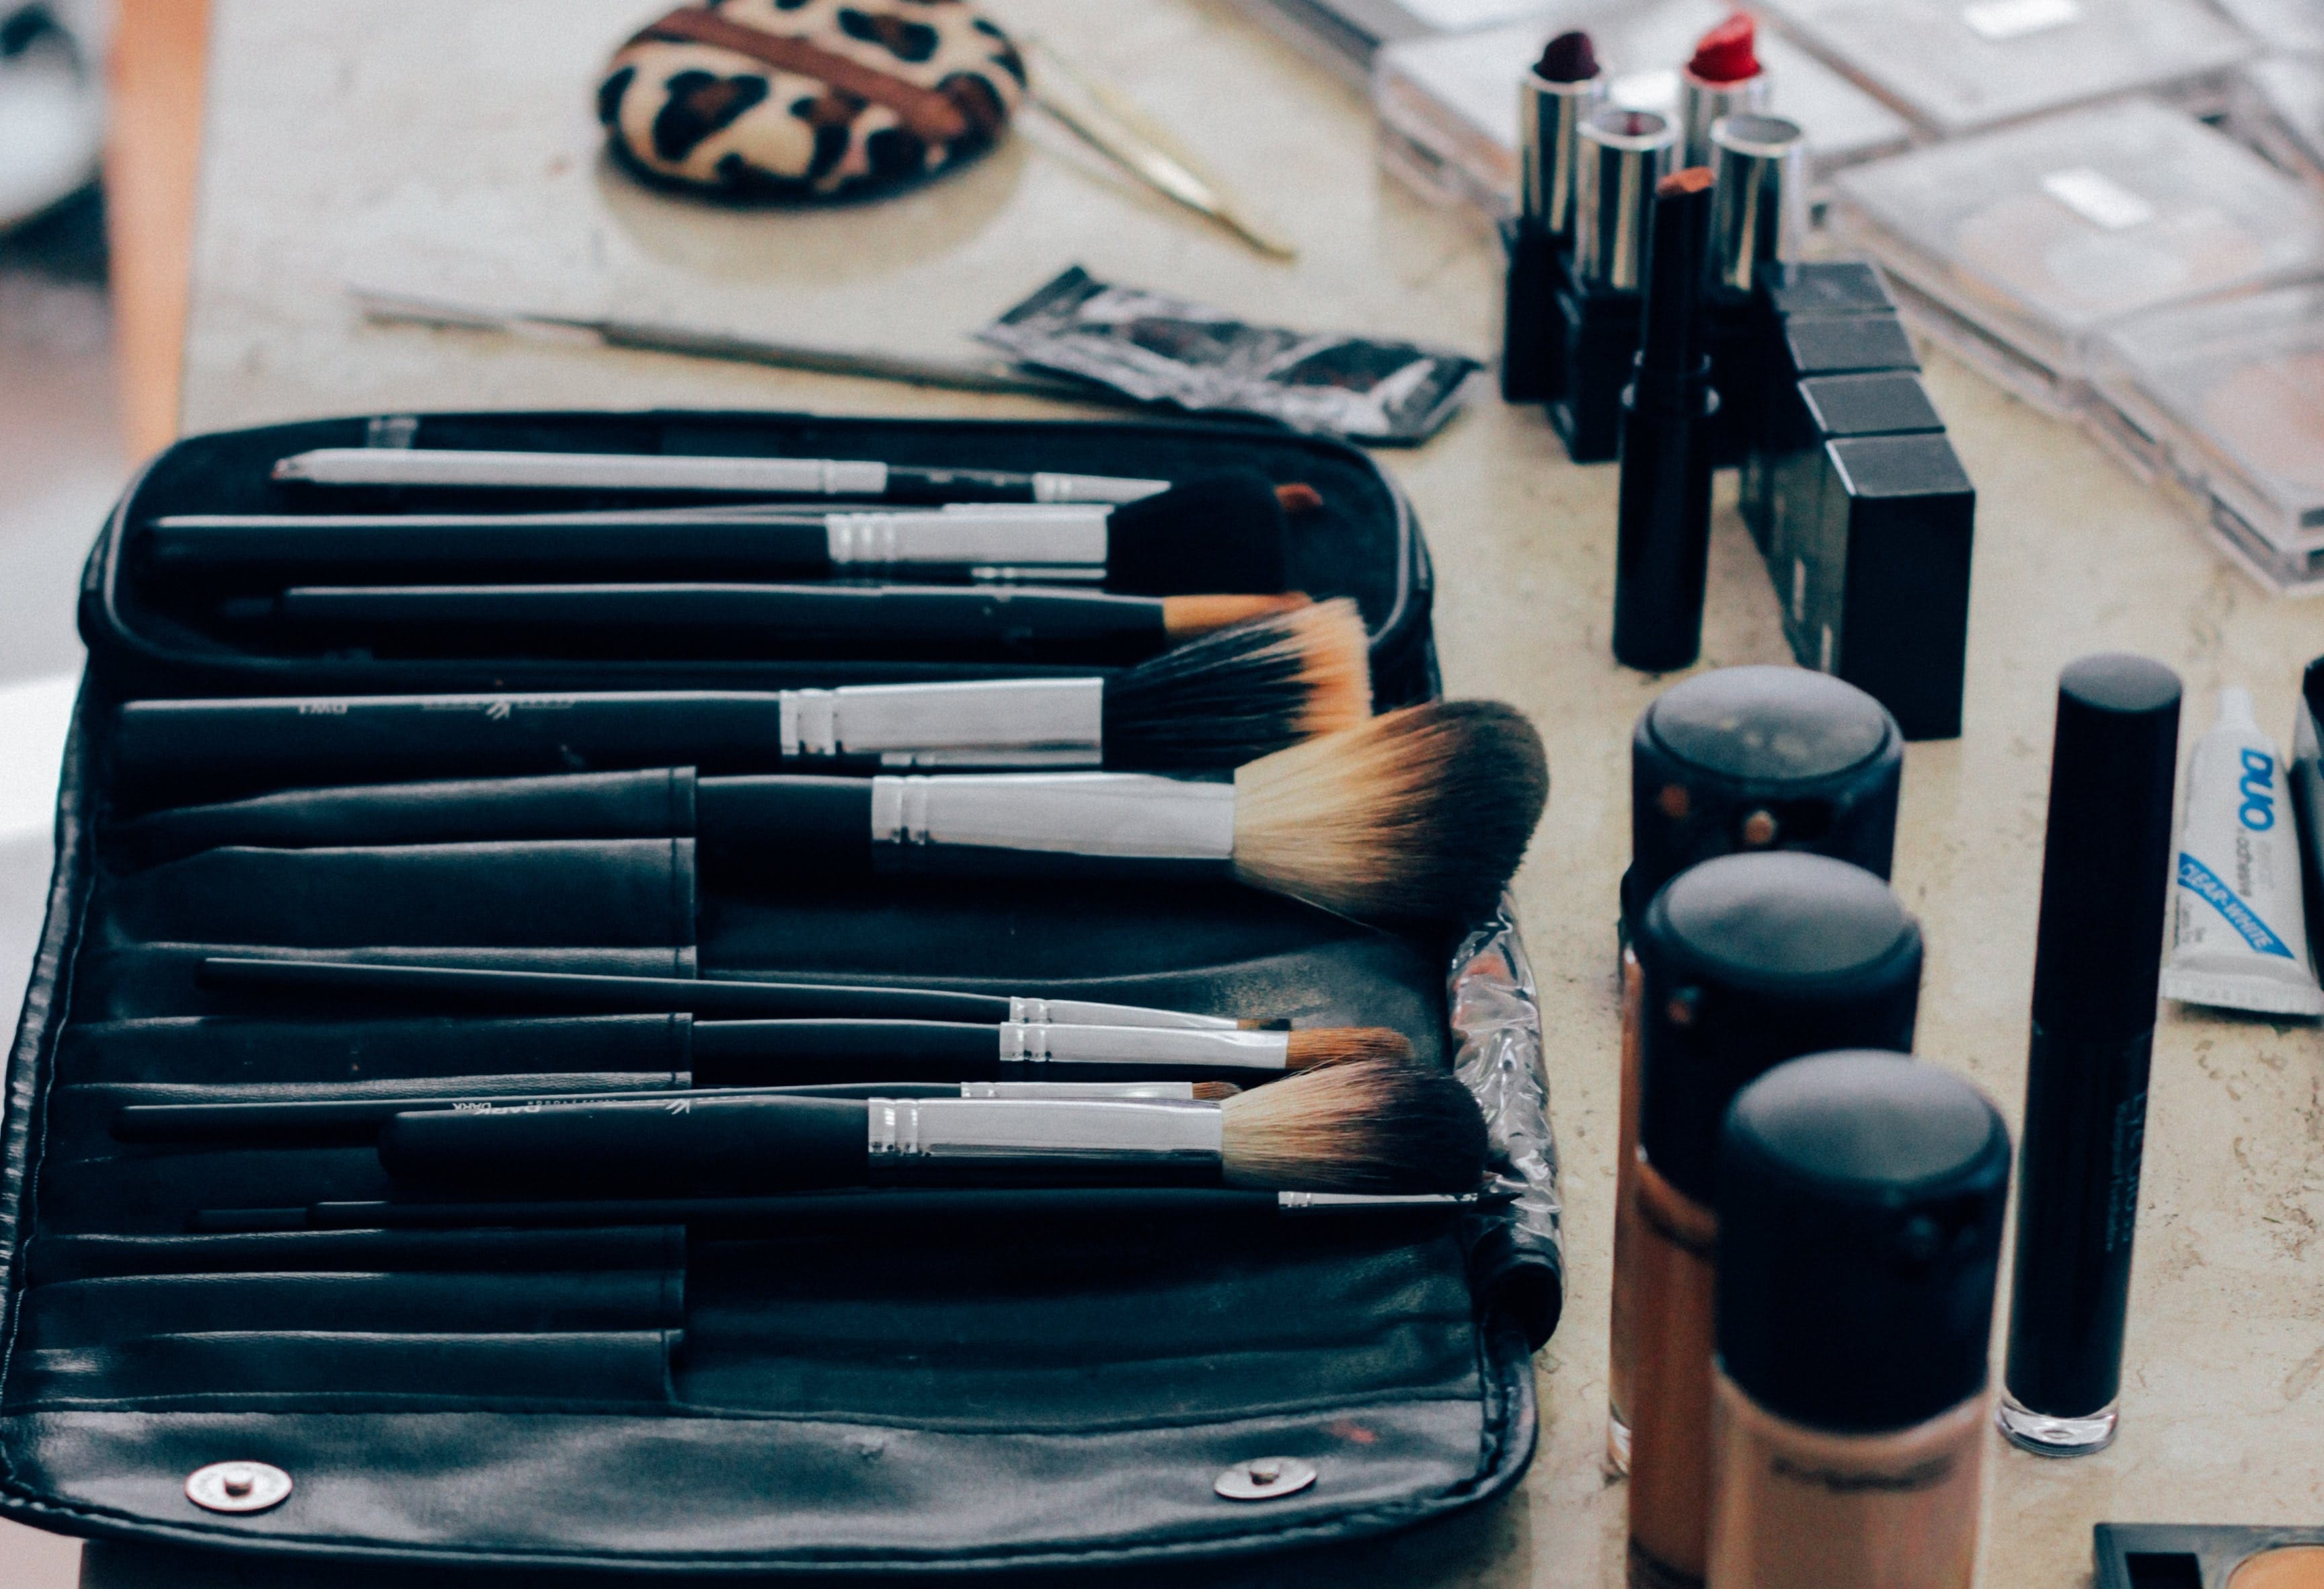 manu-camargo-60128-unsplash Fall Beauty Trends: What’s In Our Make Up Bag